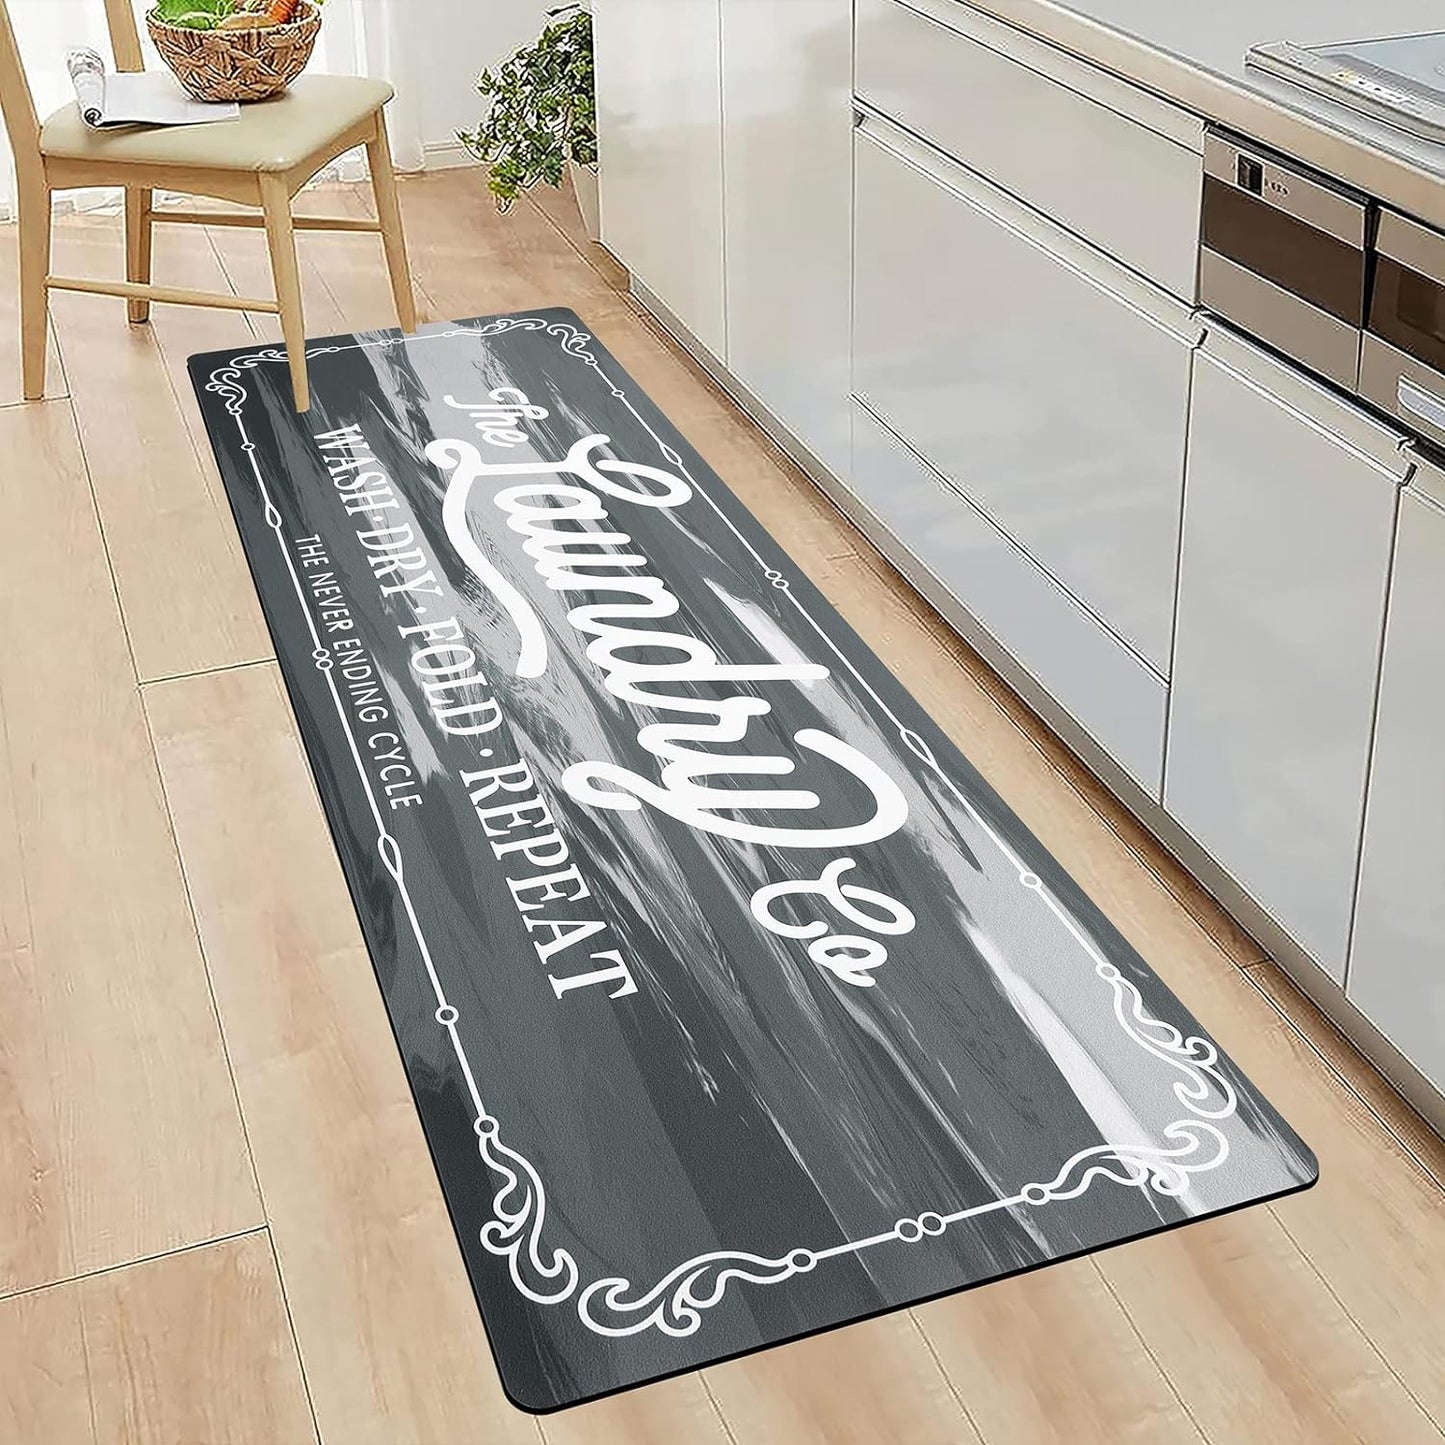 Farmhouse Laundry Room Rug Runner 20"X48" Non Slip Kitchen Rugs and Mats Laundry Room Decor Washable Rugs Carpet Runner for Kitchen Floor Laundry Room Bathroom Hallway Entryway Area Rugs